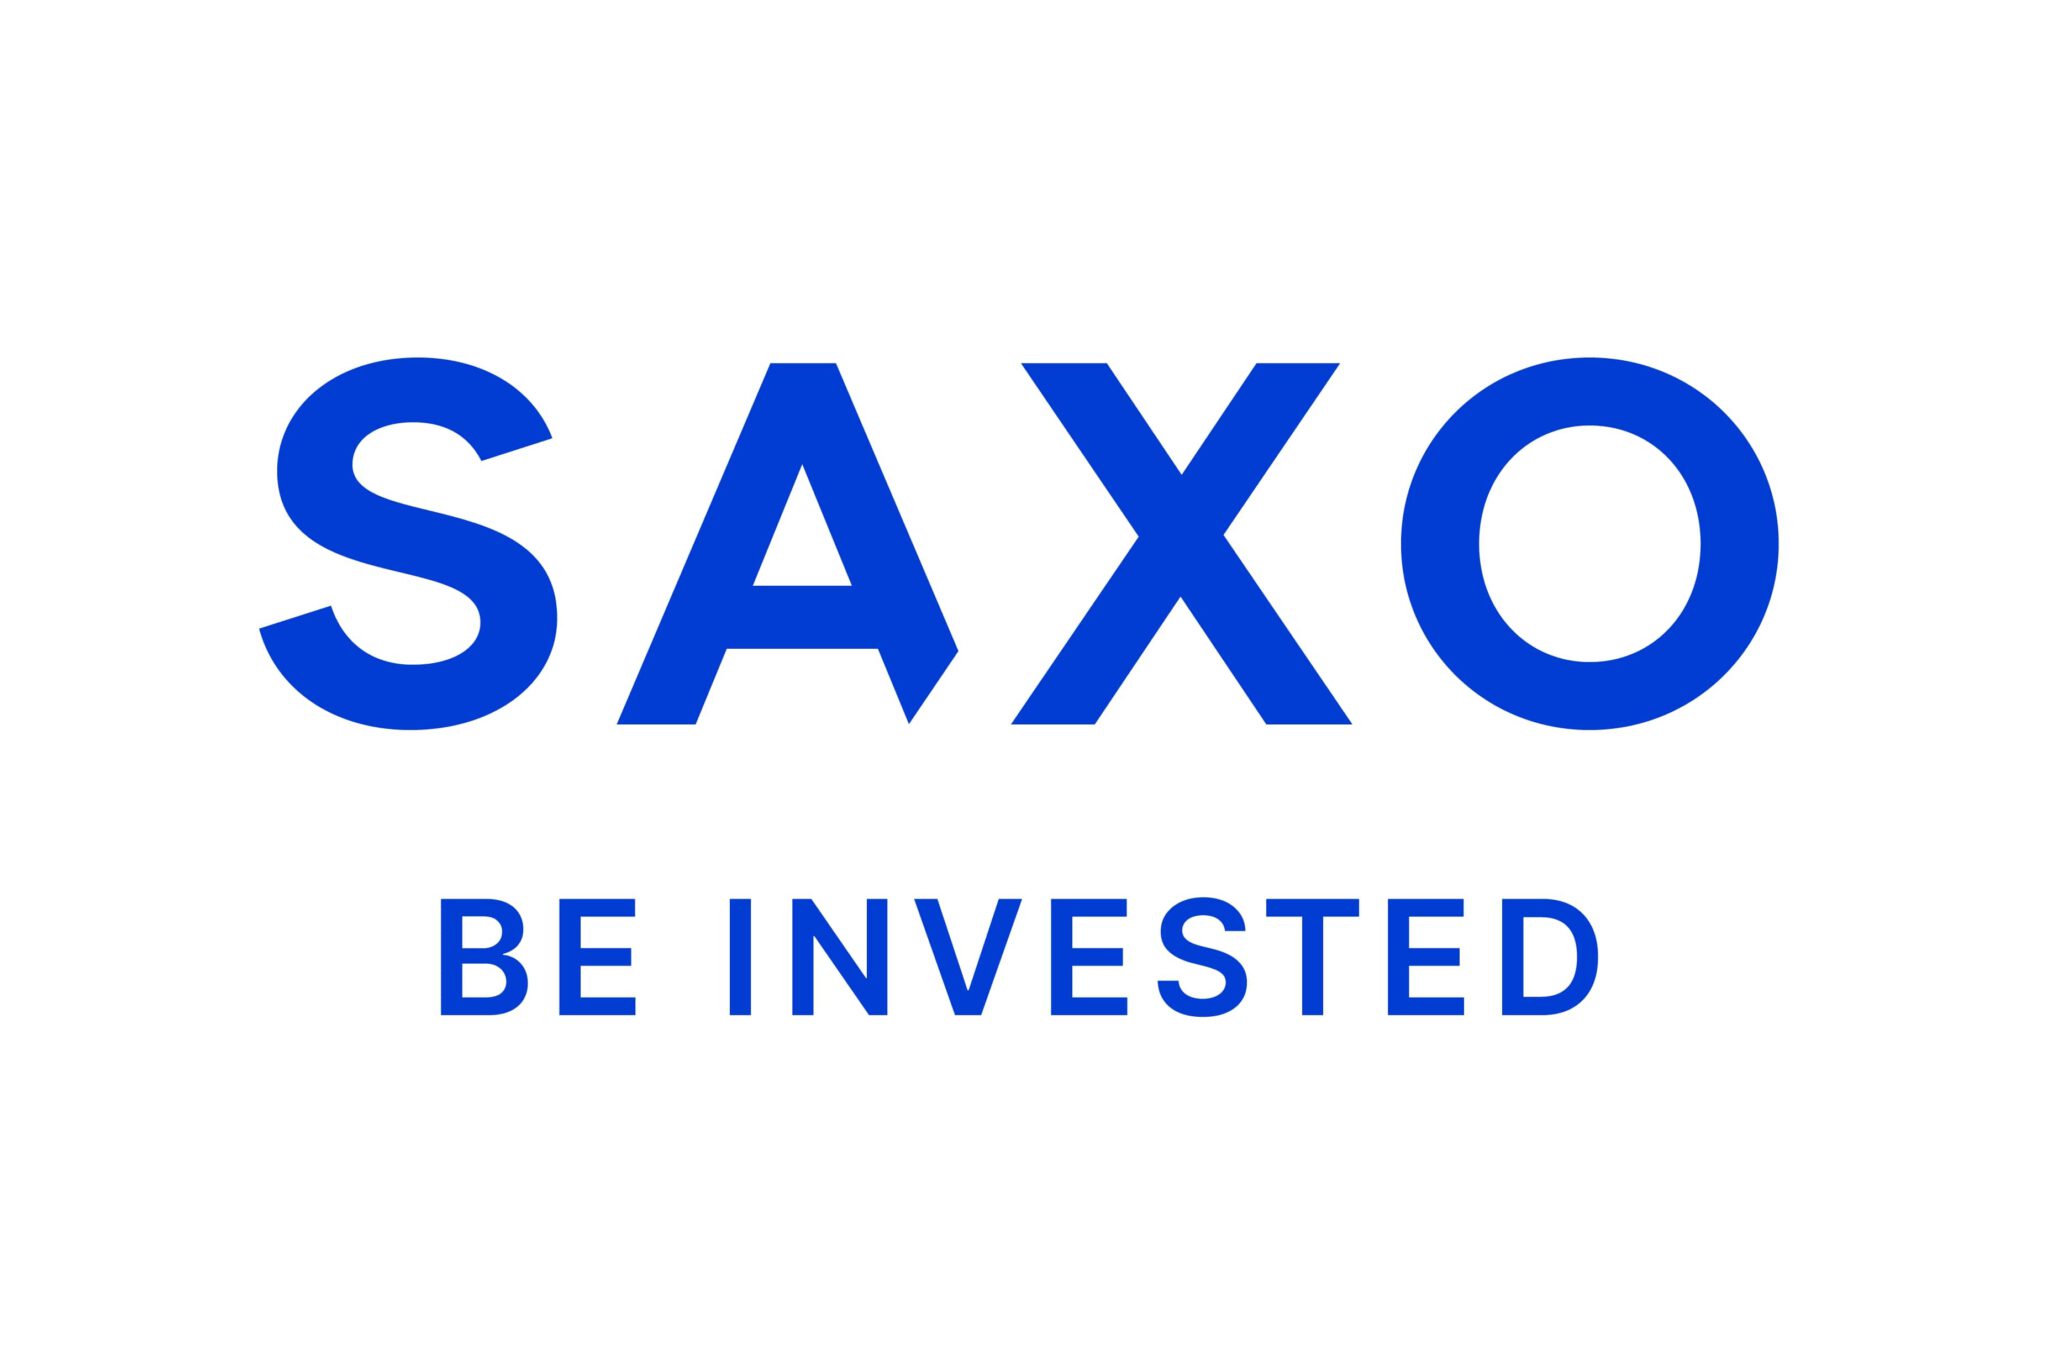 SAXO_be_invested_bold_blue_logo_rgb